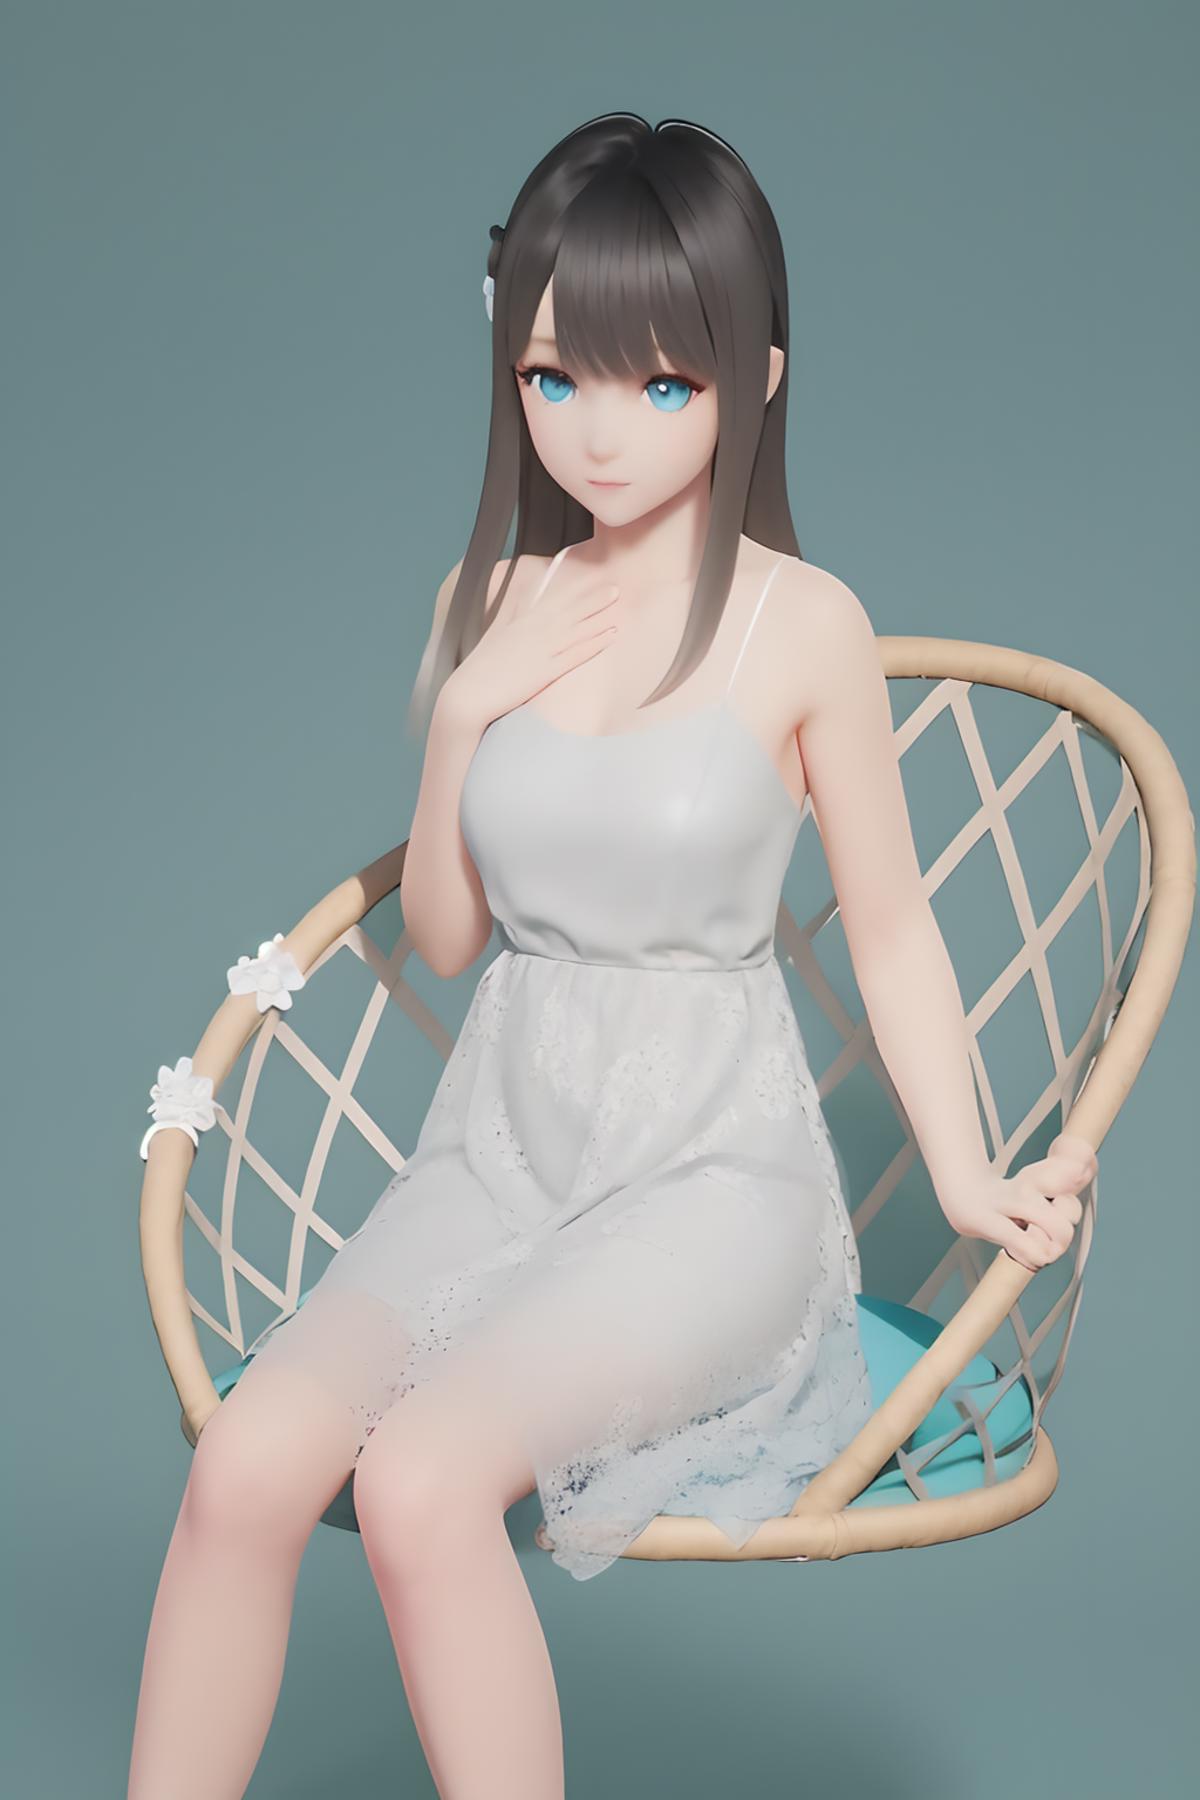 AI model image by Qiuse